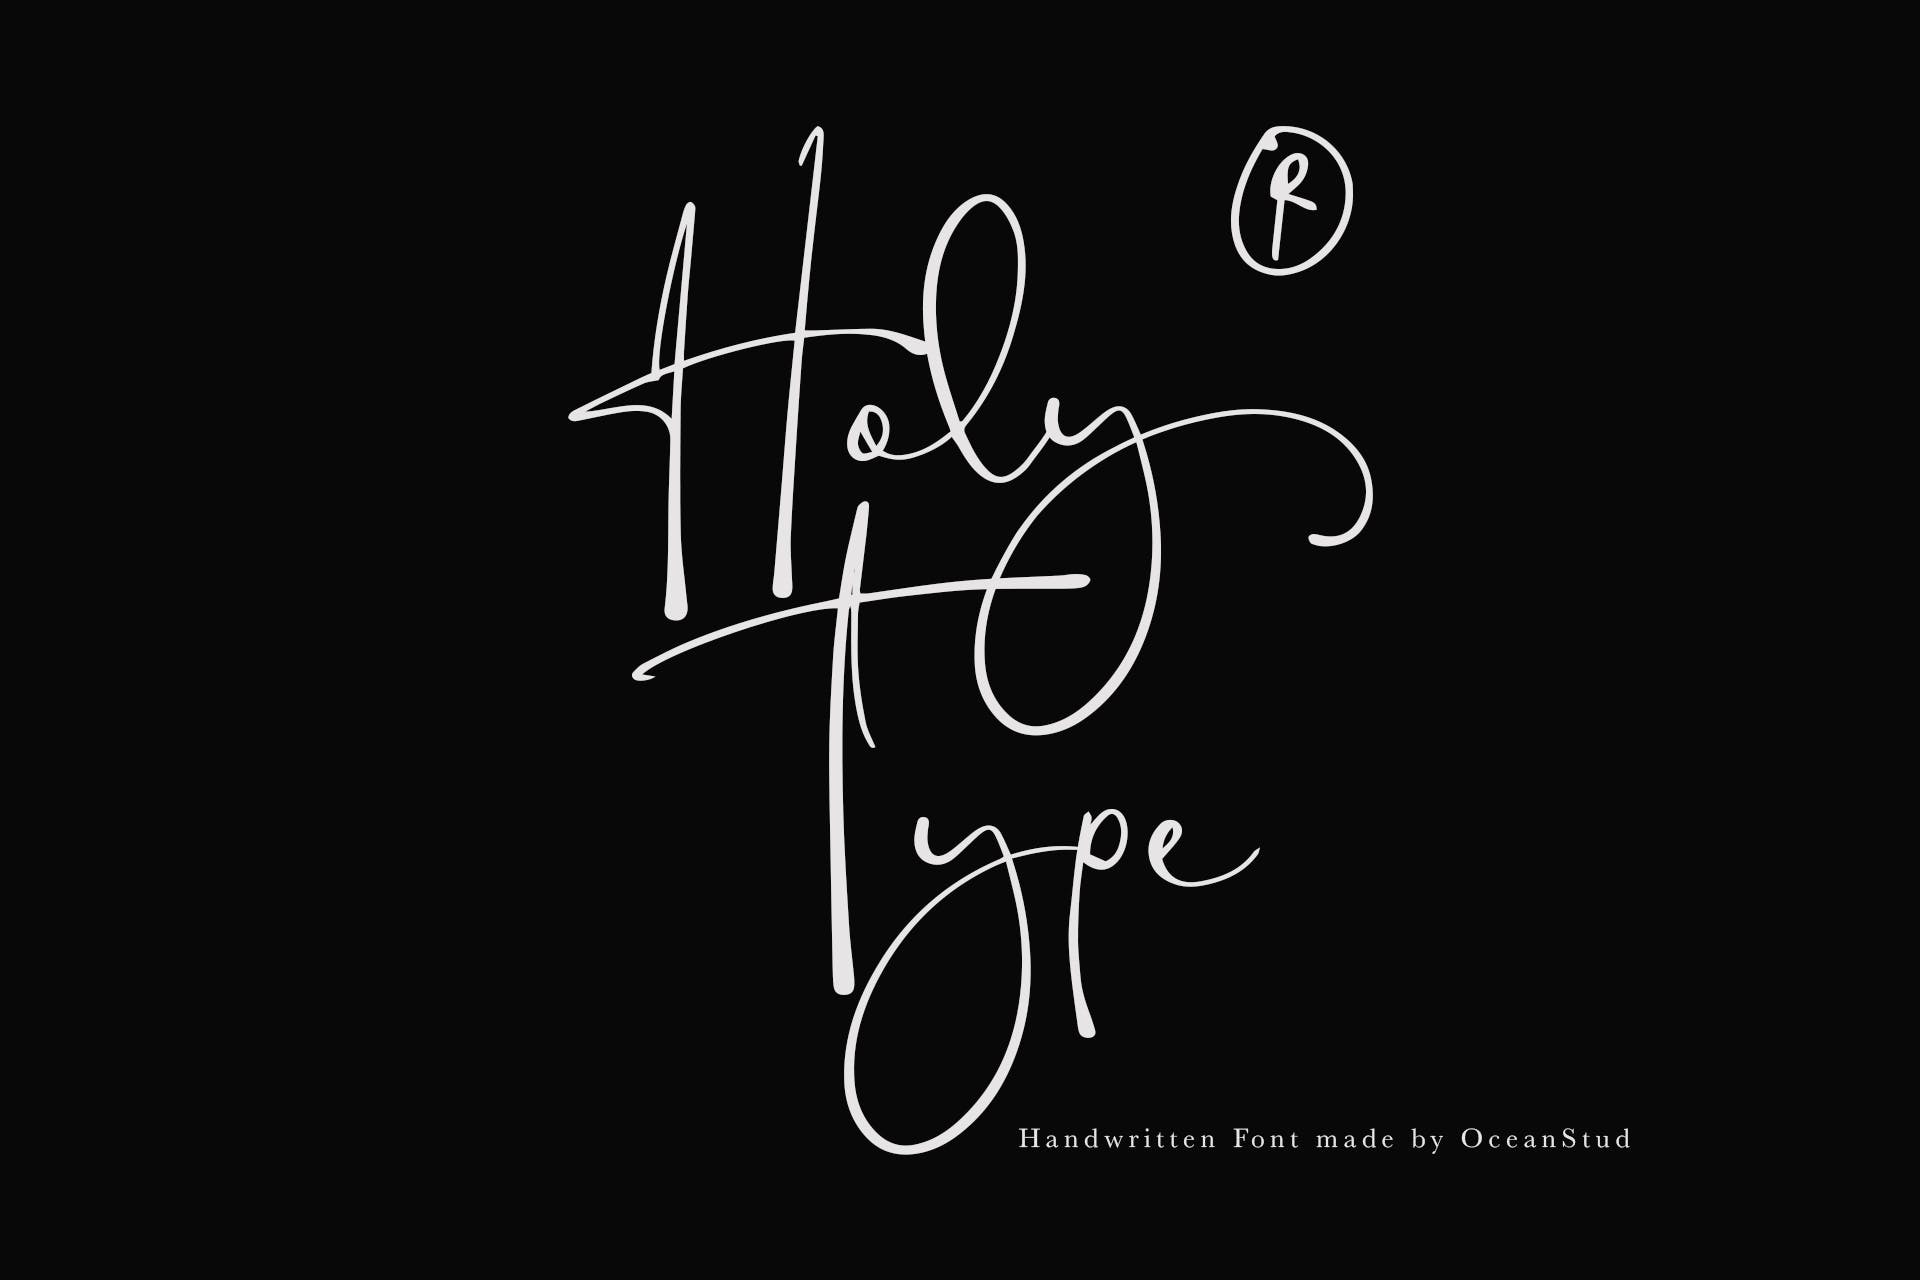 Font Holy Type